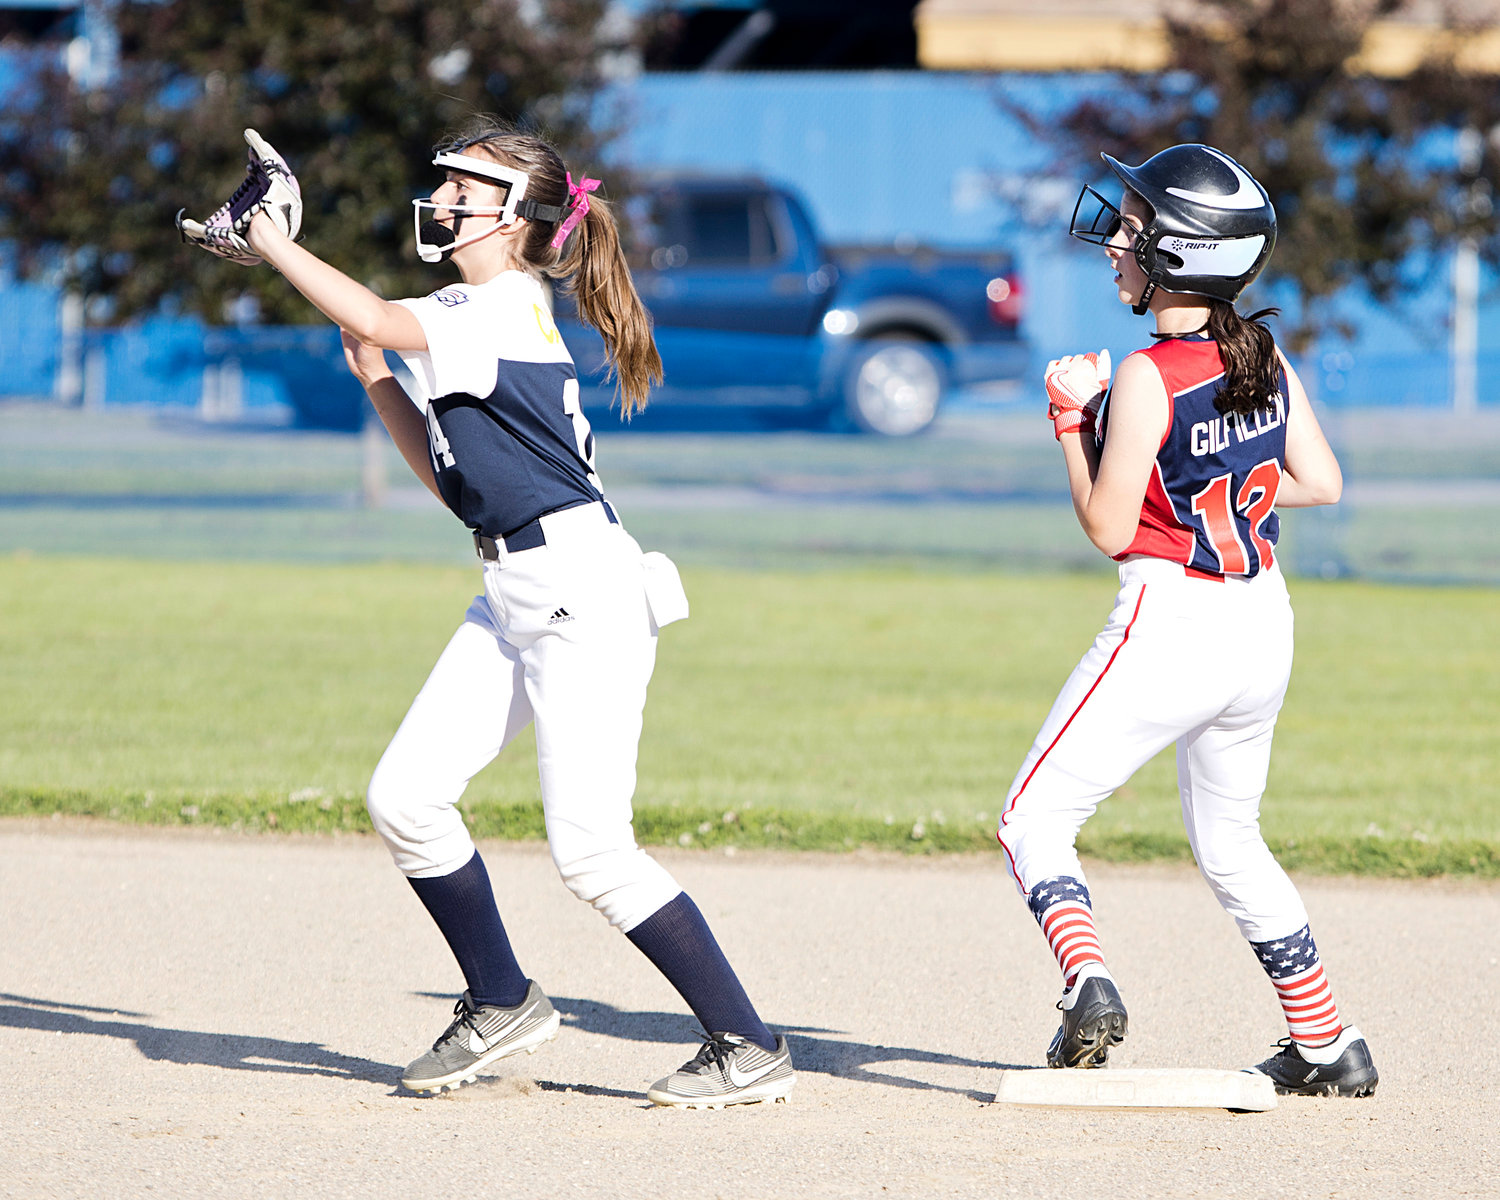 A Tiverton runner sneaks onto second base while Barrington's Lucy Cabral waits for the ball to come her way.